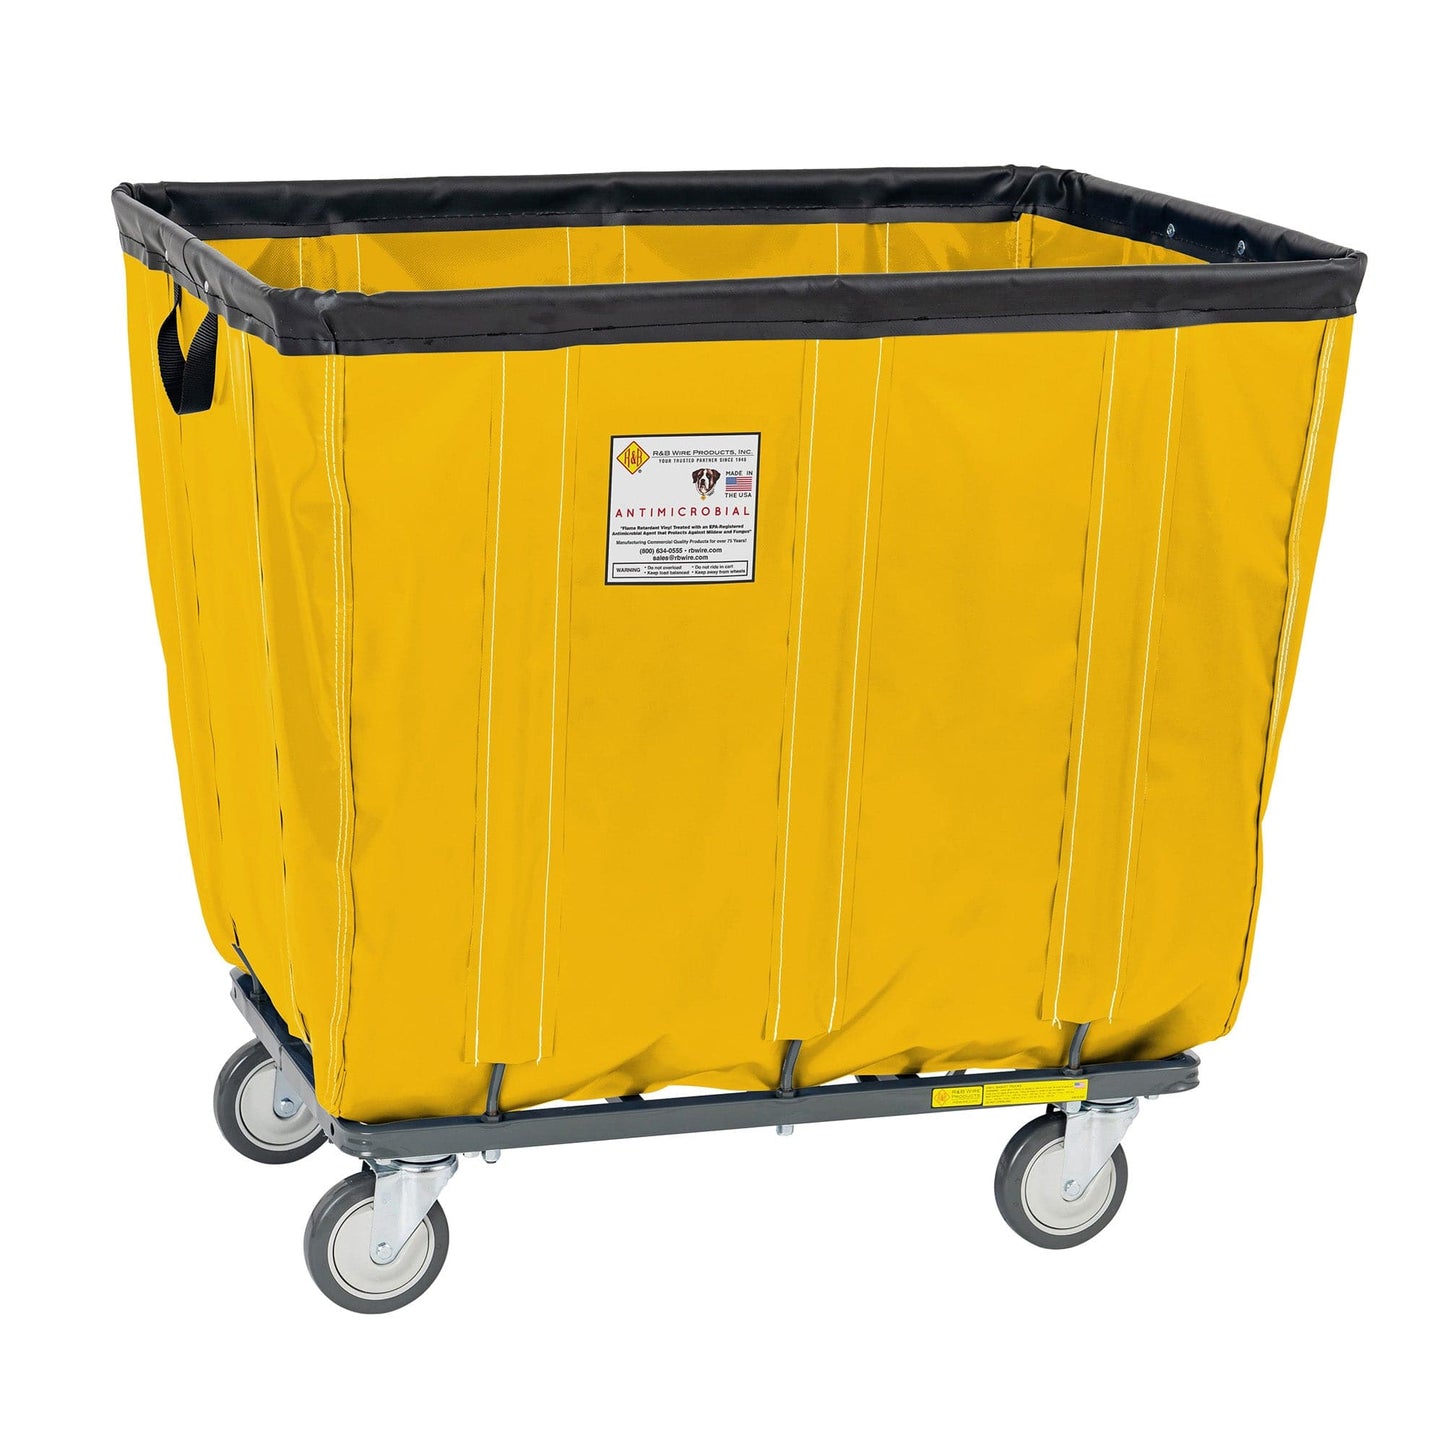 Vinyl Basket Truck with Antimicrobial Liner - 6 Bushel - Knocked Down - R&B Wire